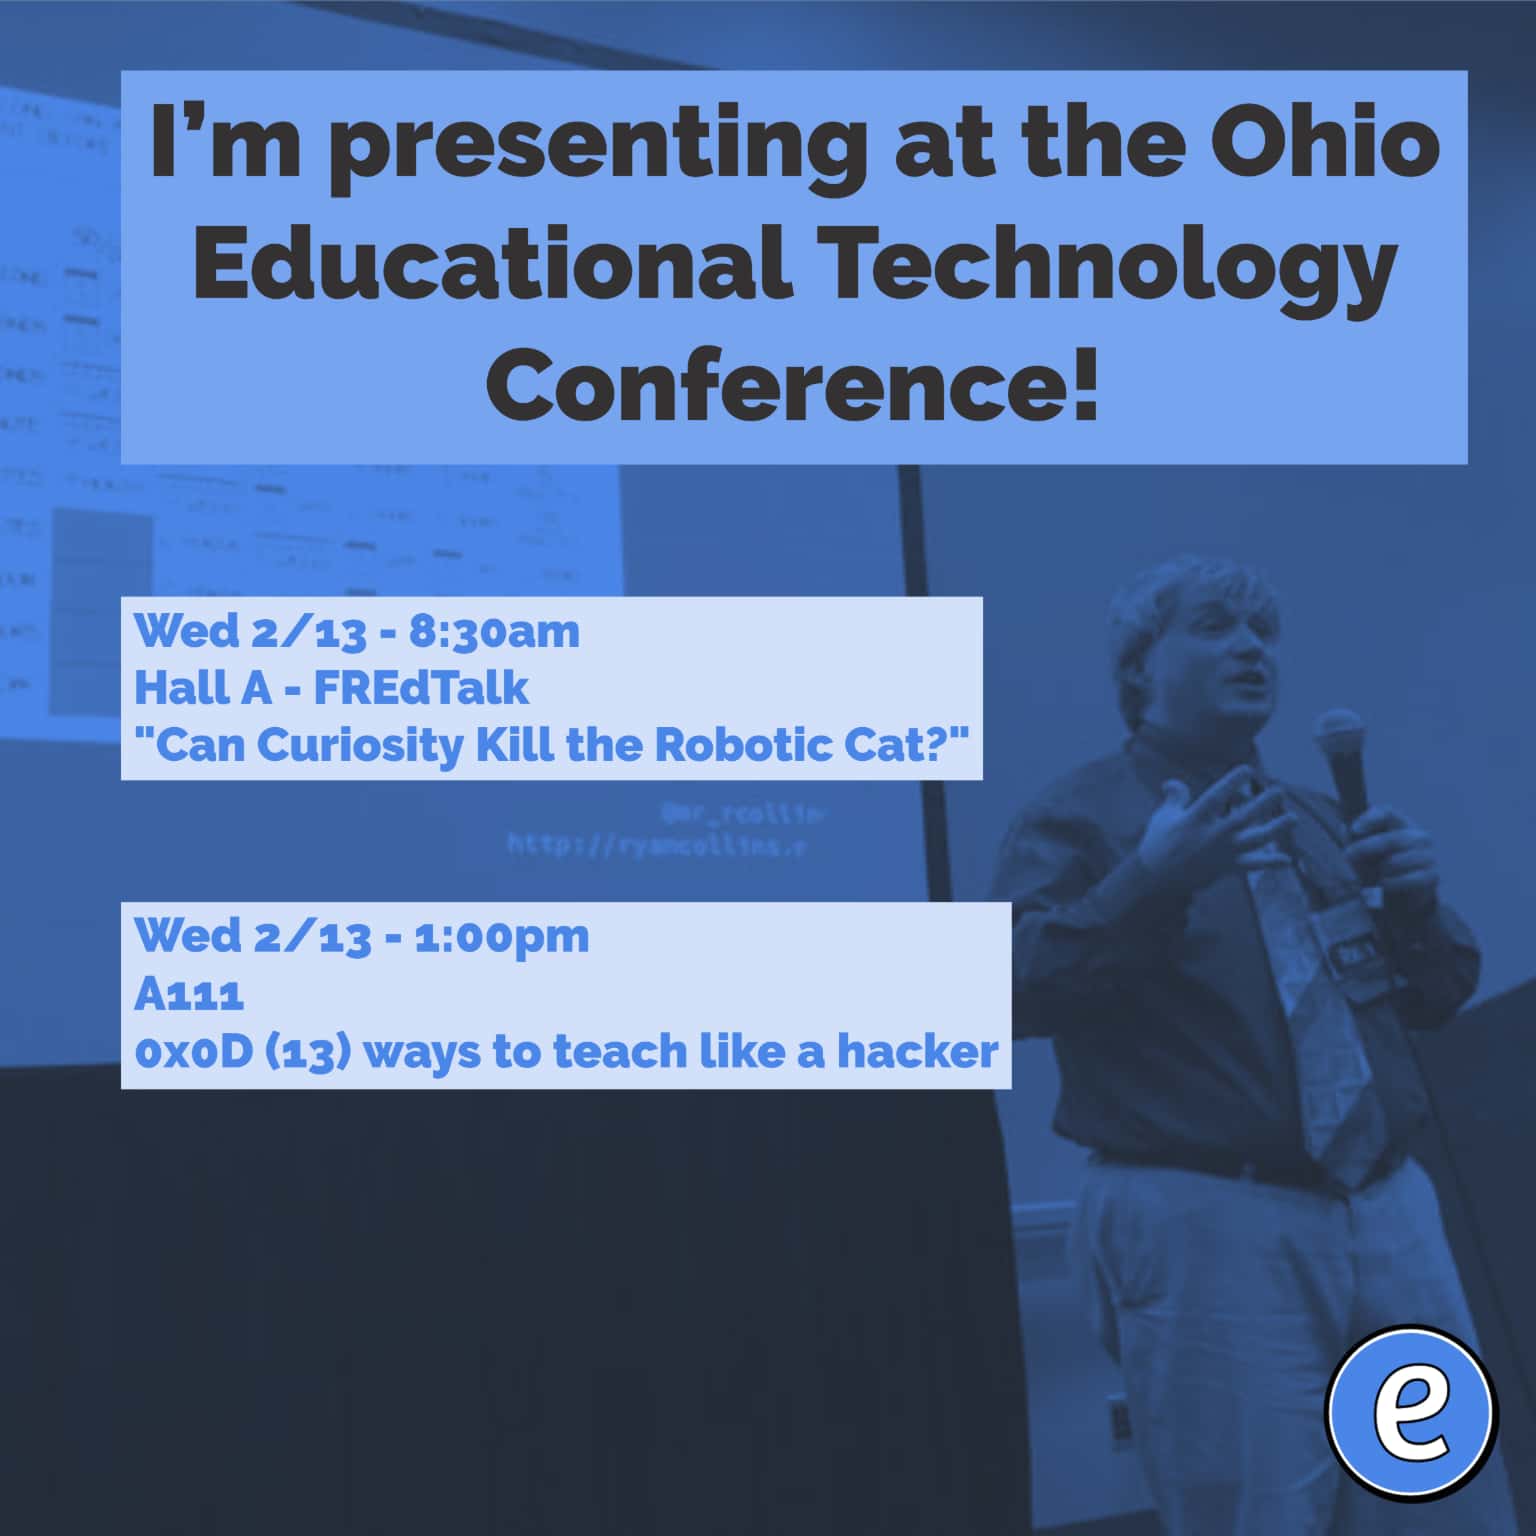 I’m presenting at the Ohio Educational Technology Conference! oetc19